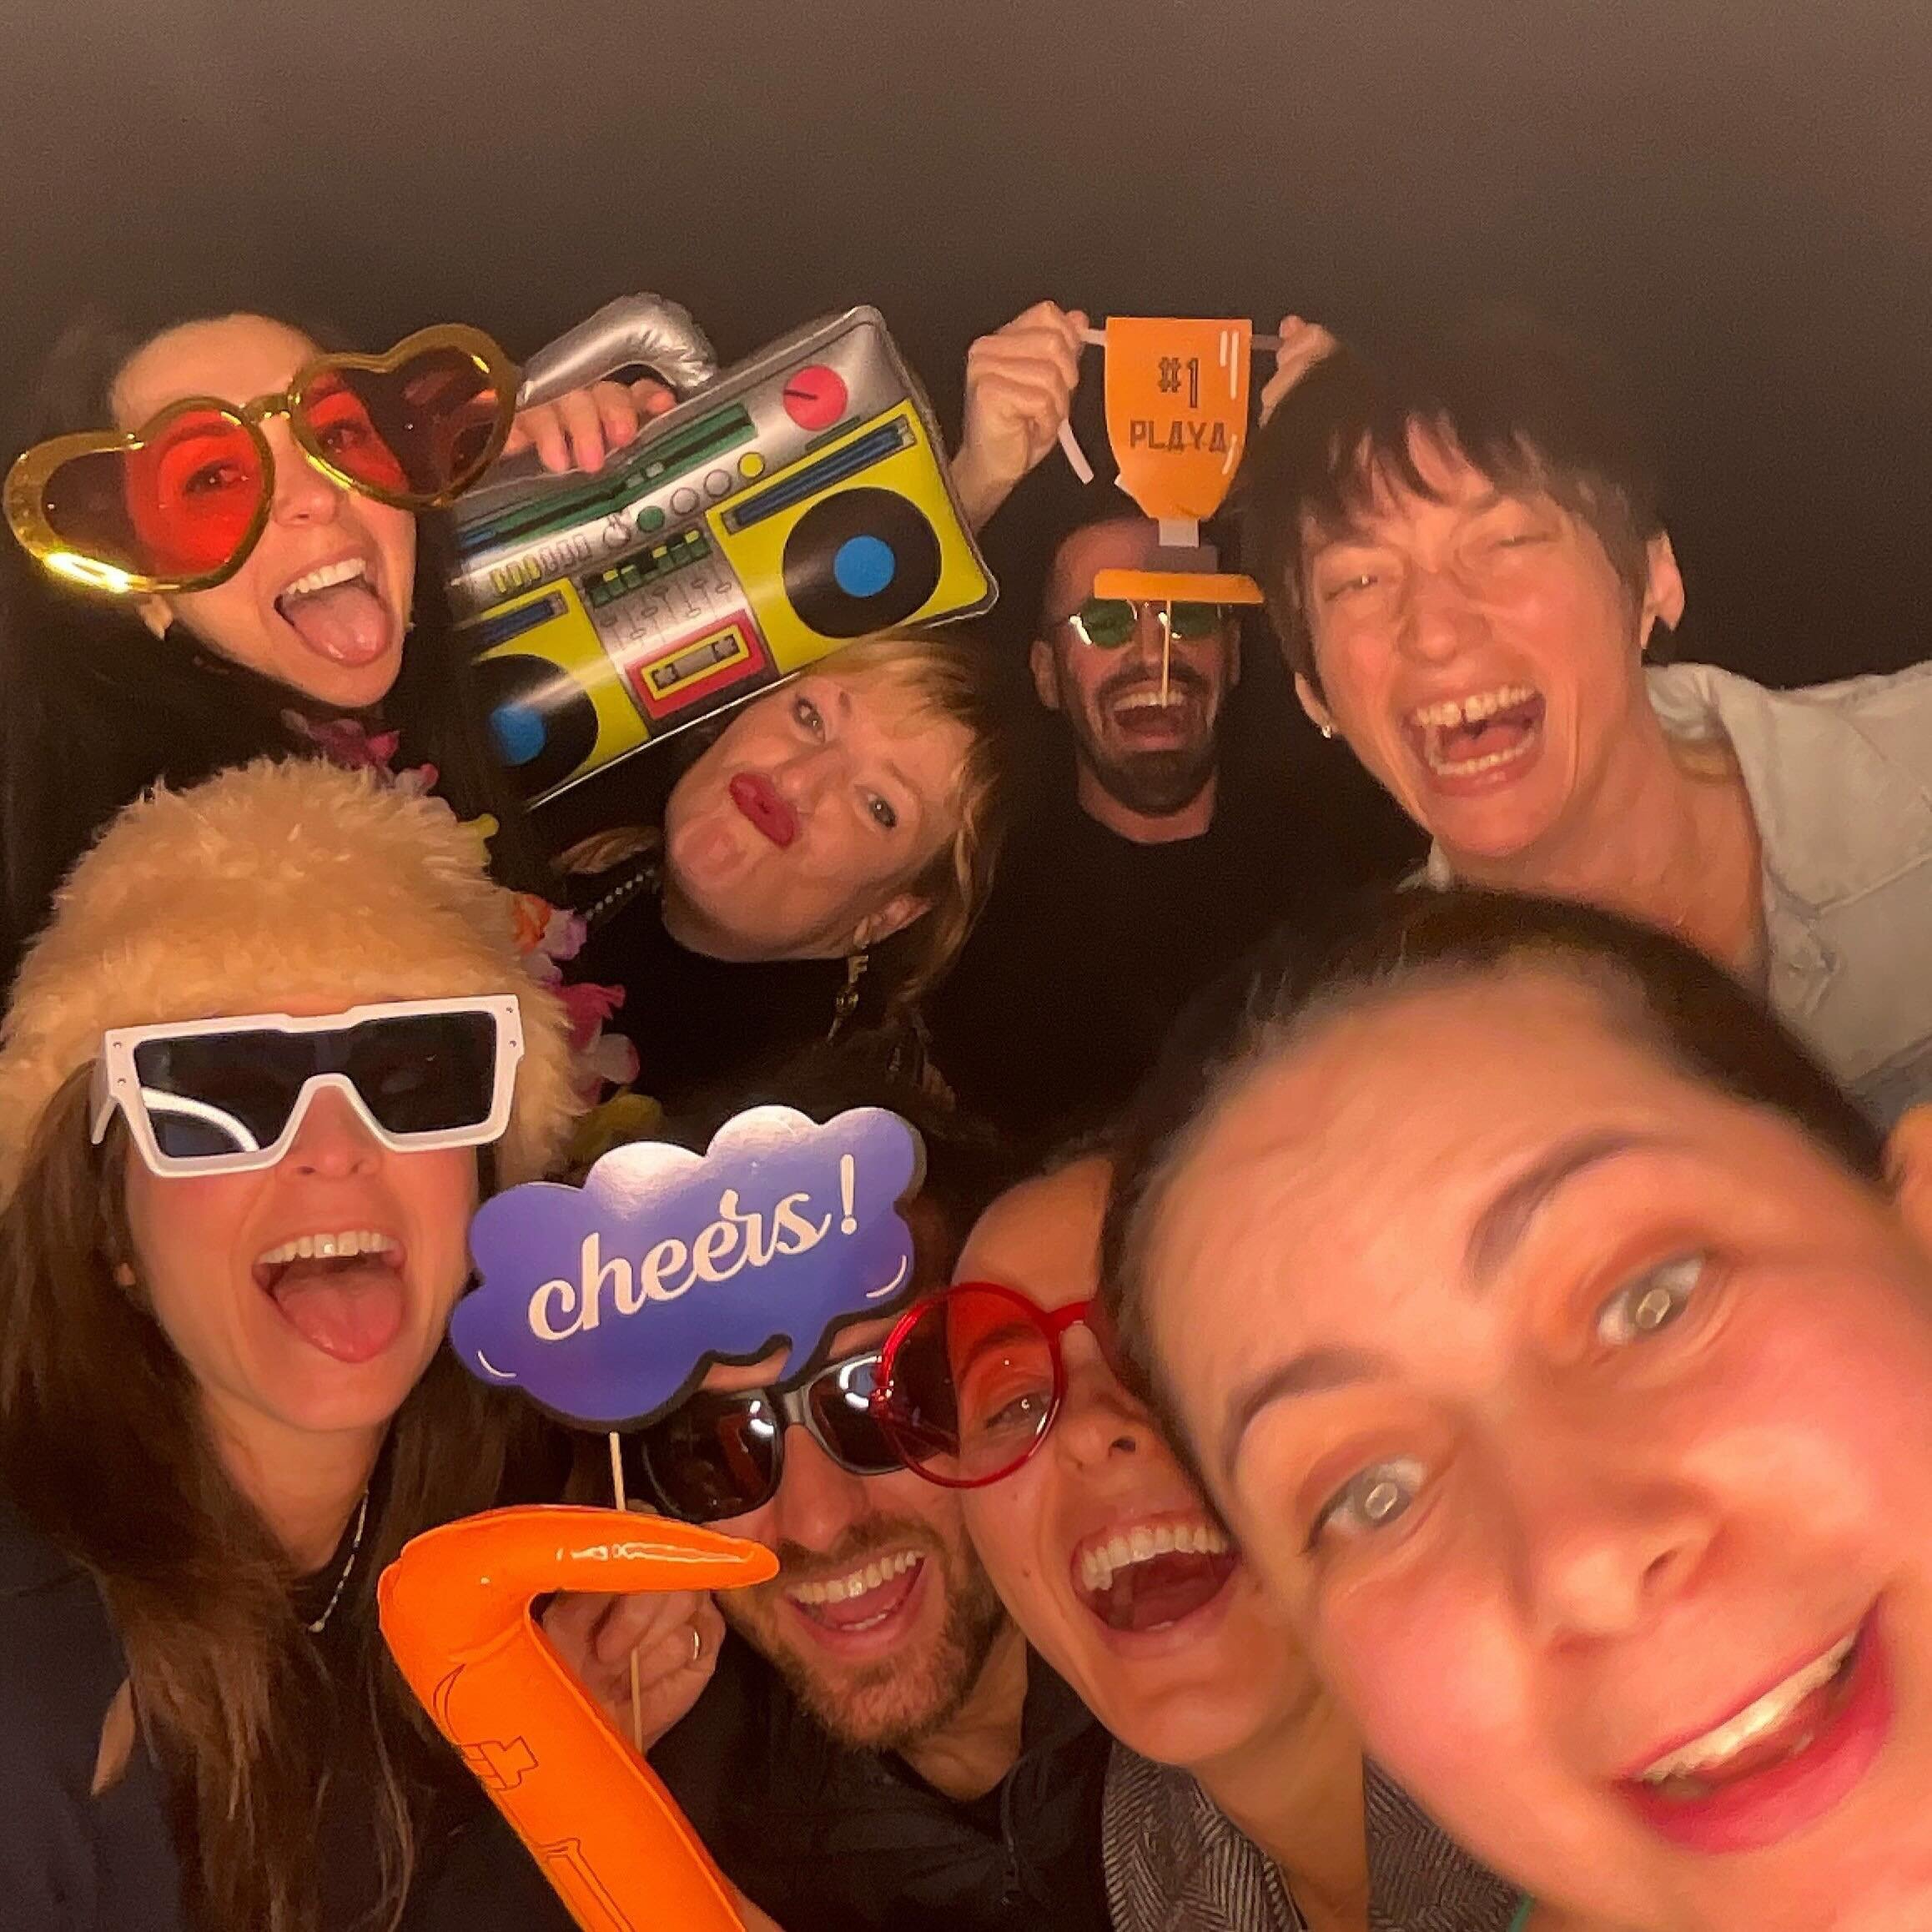 Picture First Photo Booth wishes you a Happy Friday with the same energy as everyone in this booth picture! 🤩🥳🥂 

#photobooth #picturefirstphotobooth #photoboothportland